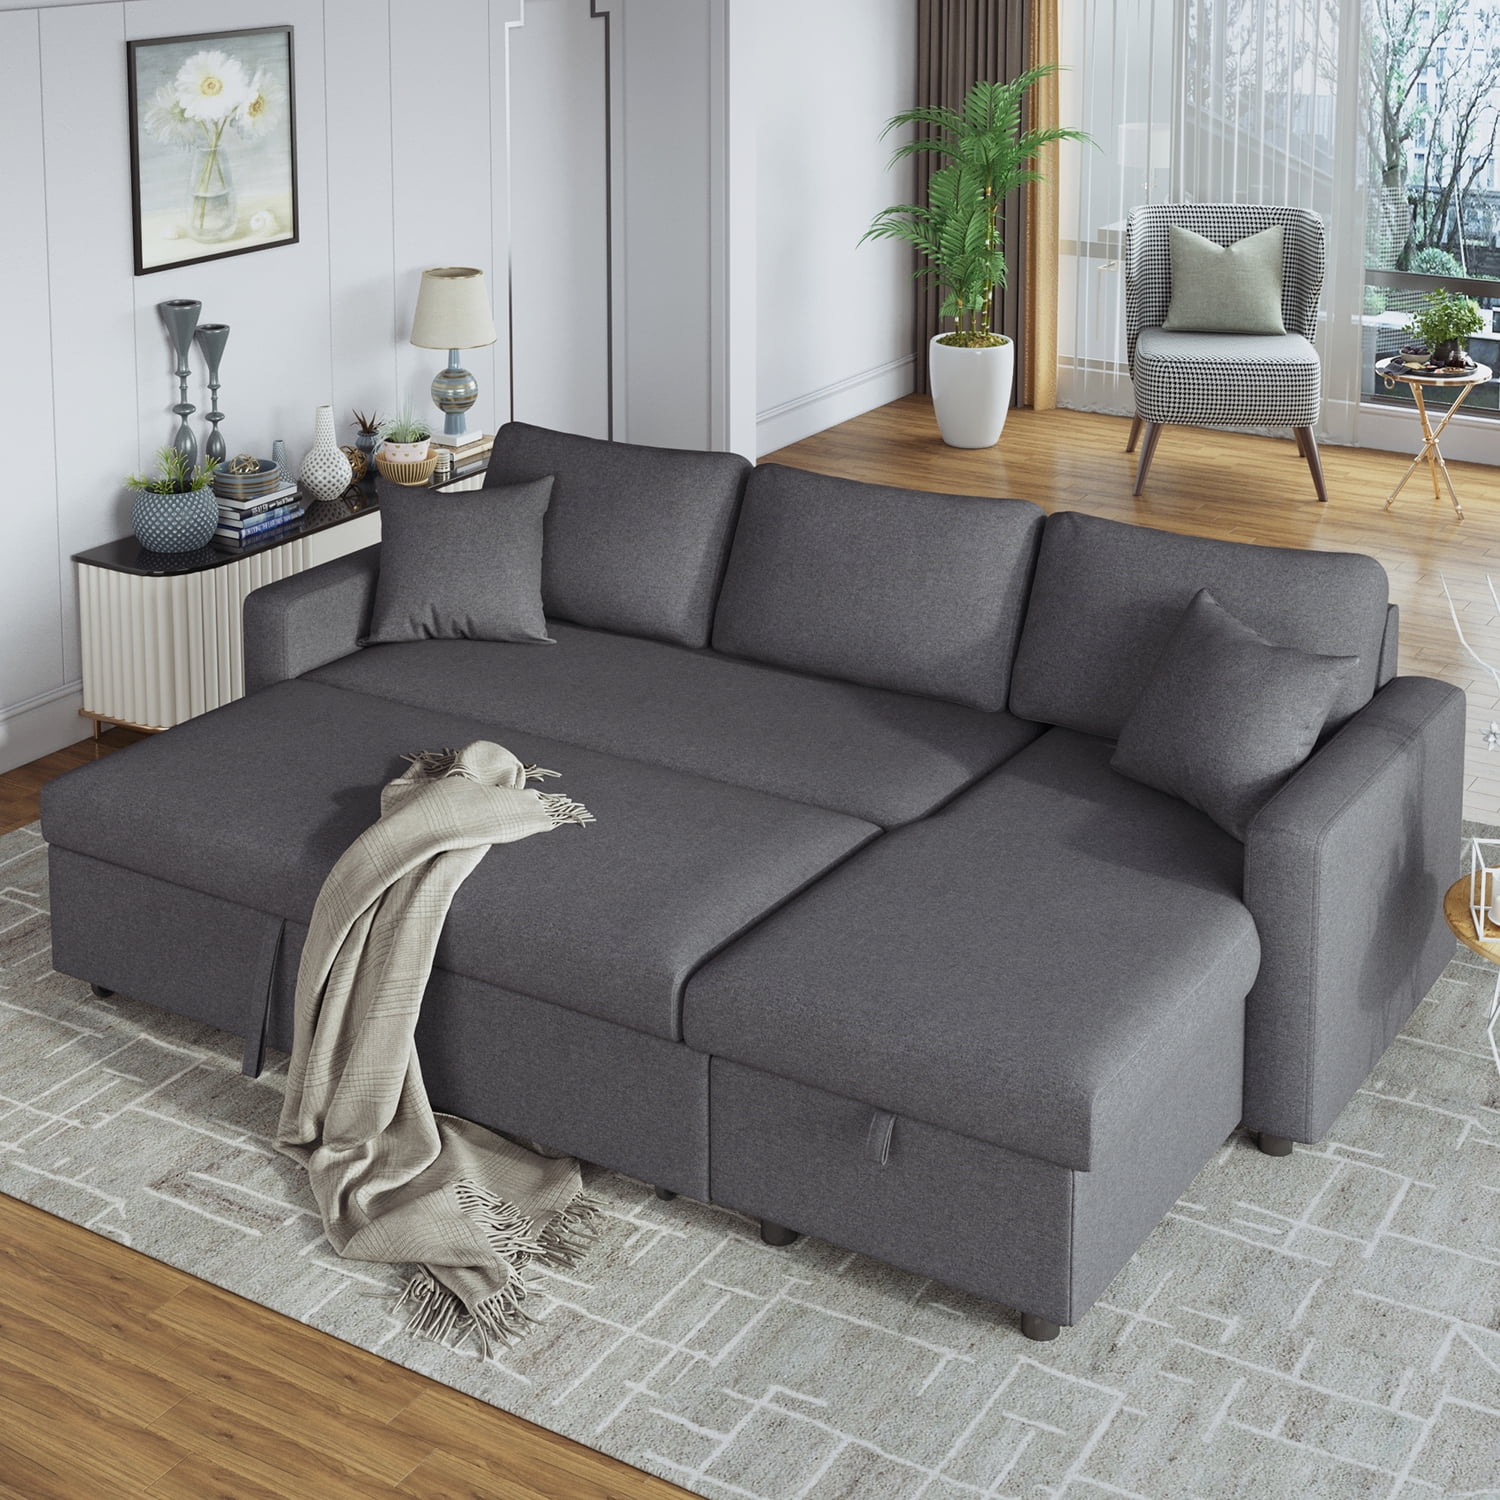 Churanty Upholstery Sleeper Sectional Sofa Pull Out Bed with